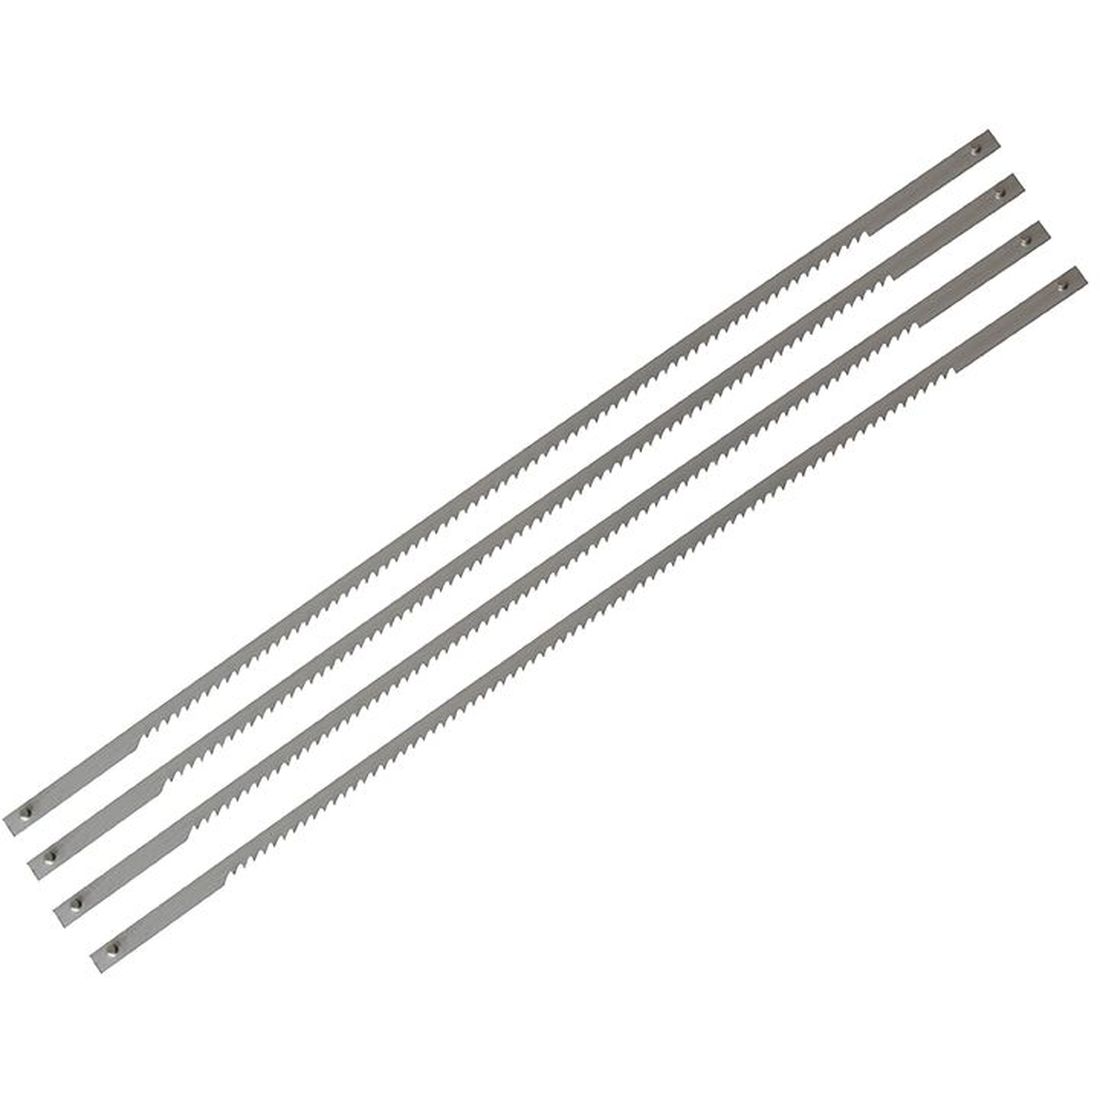 STANLEY Coping Saw Blades 165mm (6.1/2in) 14 TPI (Card 4)                               